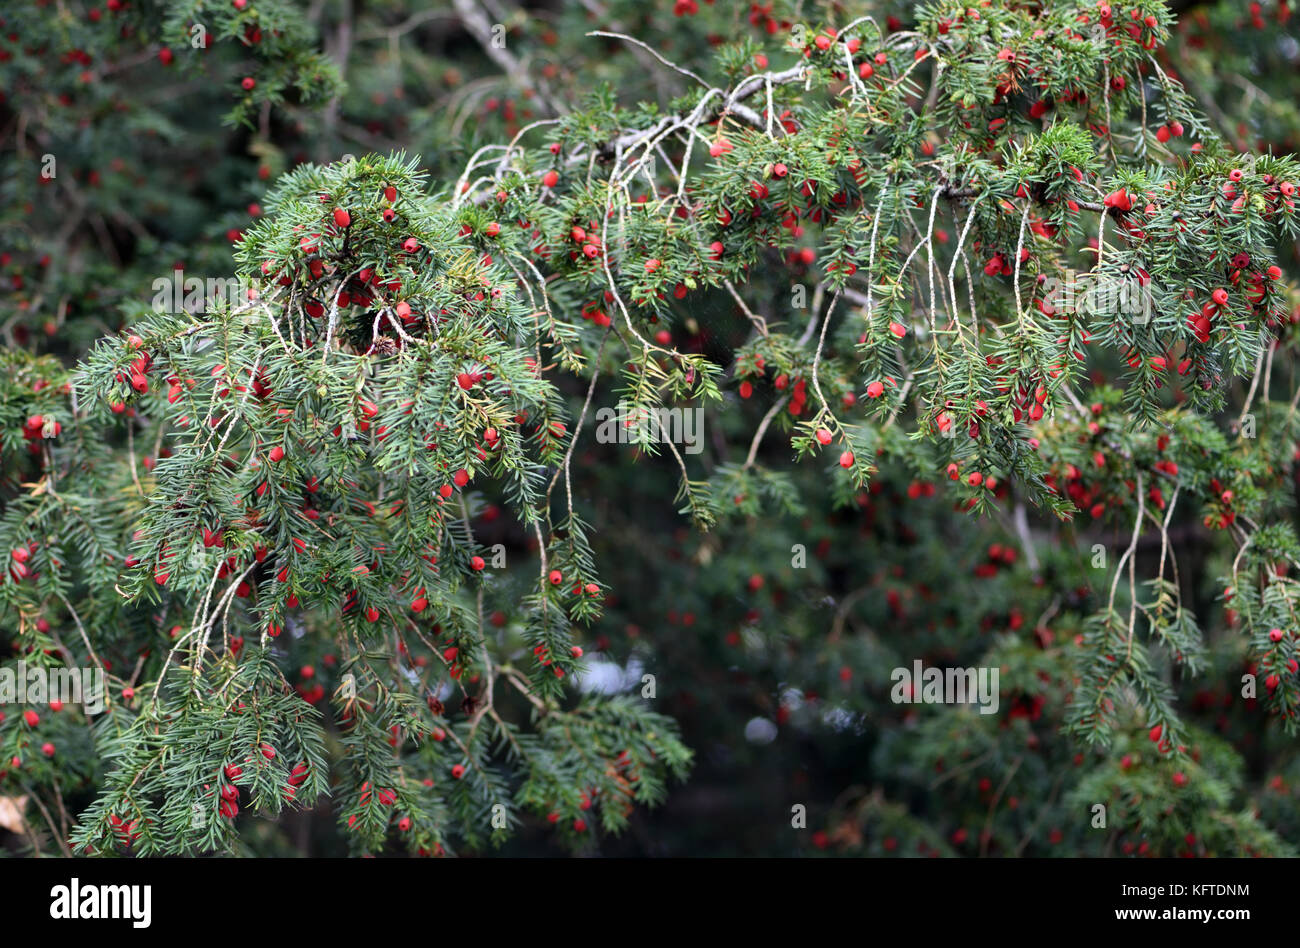 The red fruits and dark green leaves of a yew tree (Taxus baccata). Winchester, Hampshire, UK Stock Photo